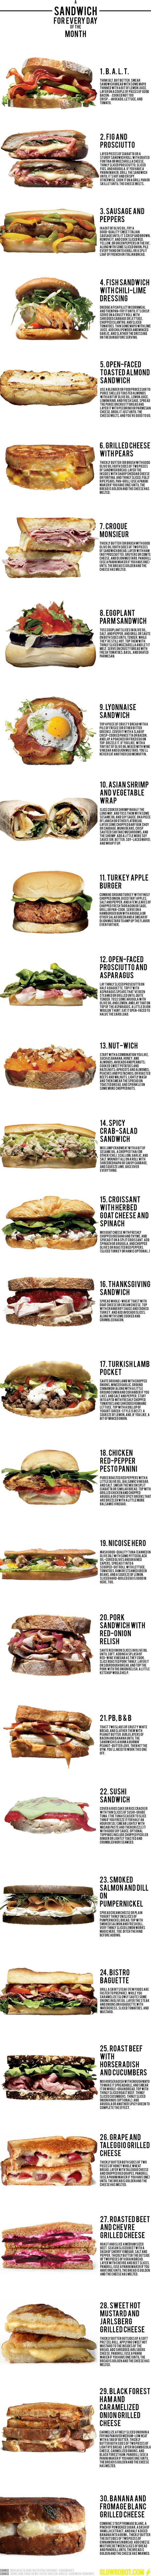 a sandwich for every day of the month.